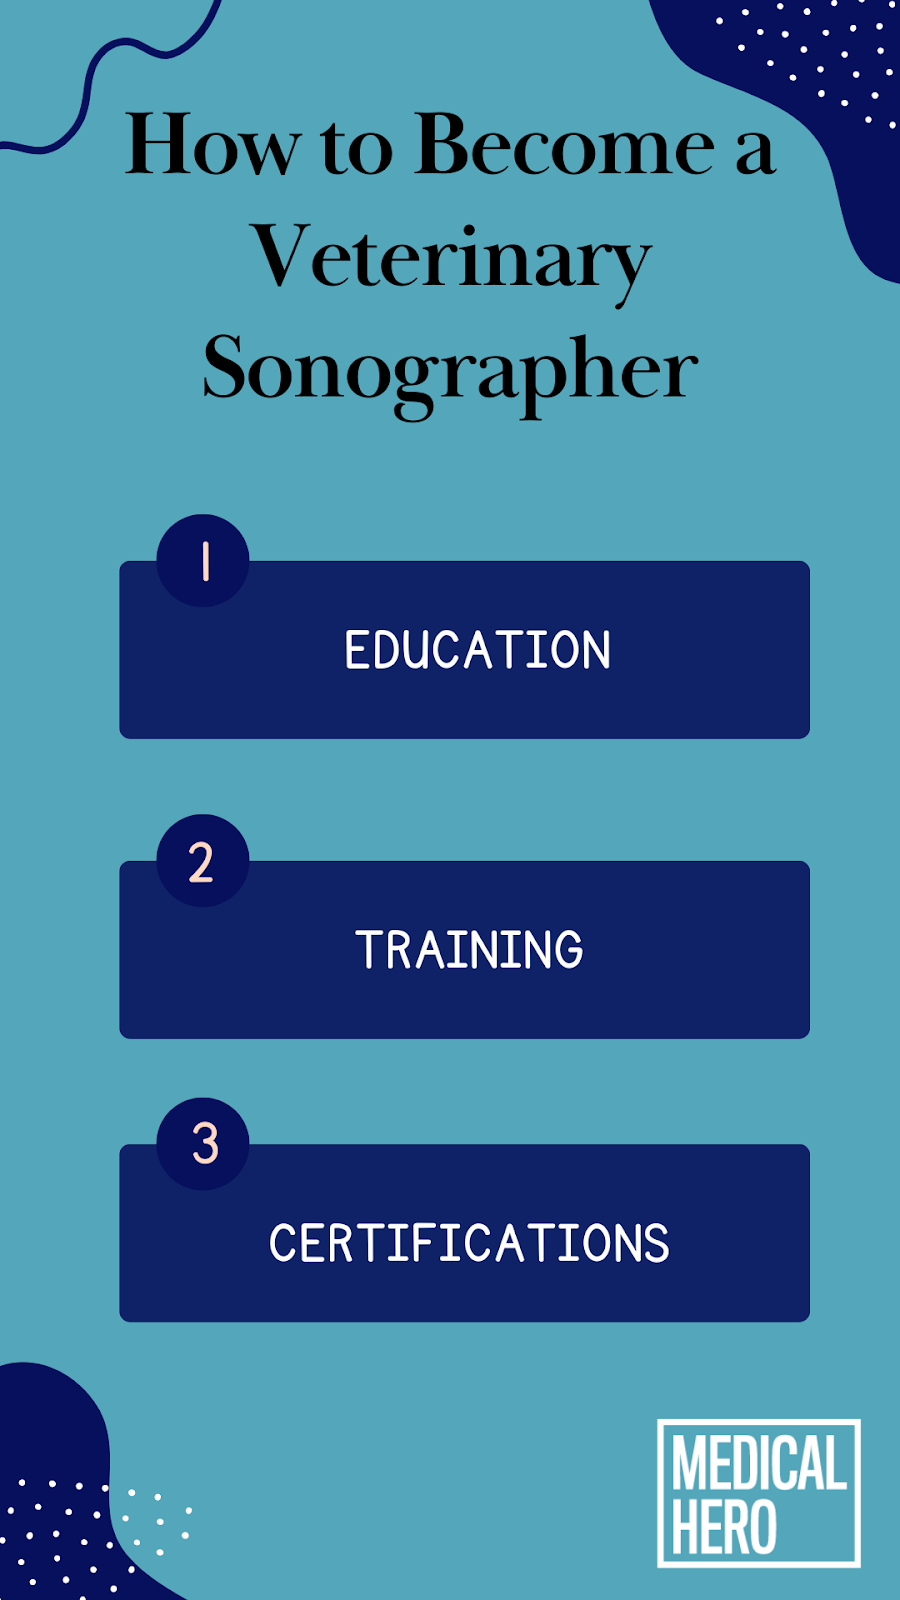 How to Become a Veterinary Sonographer